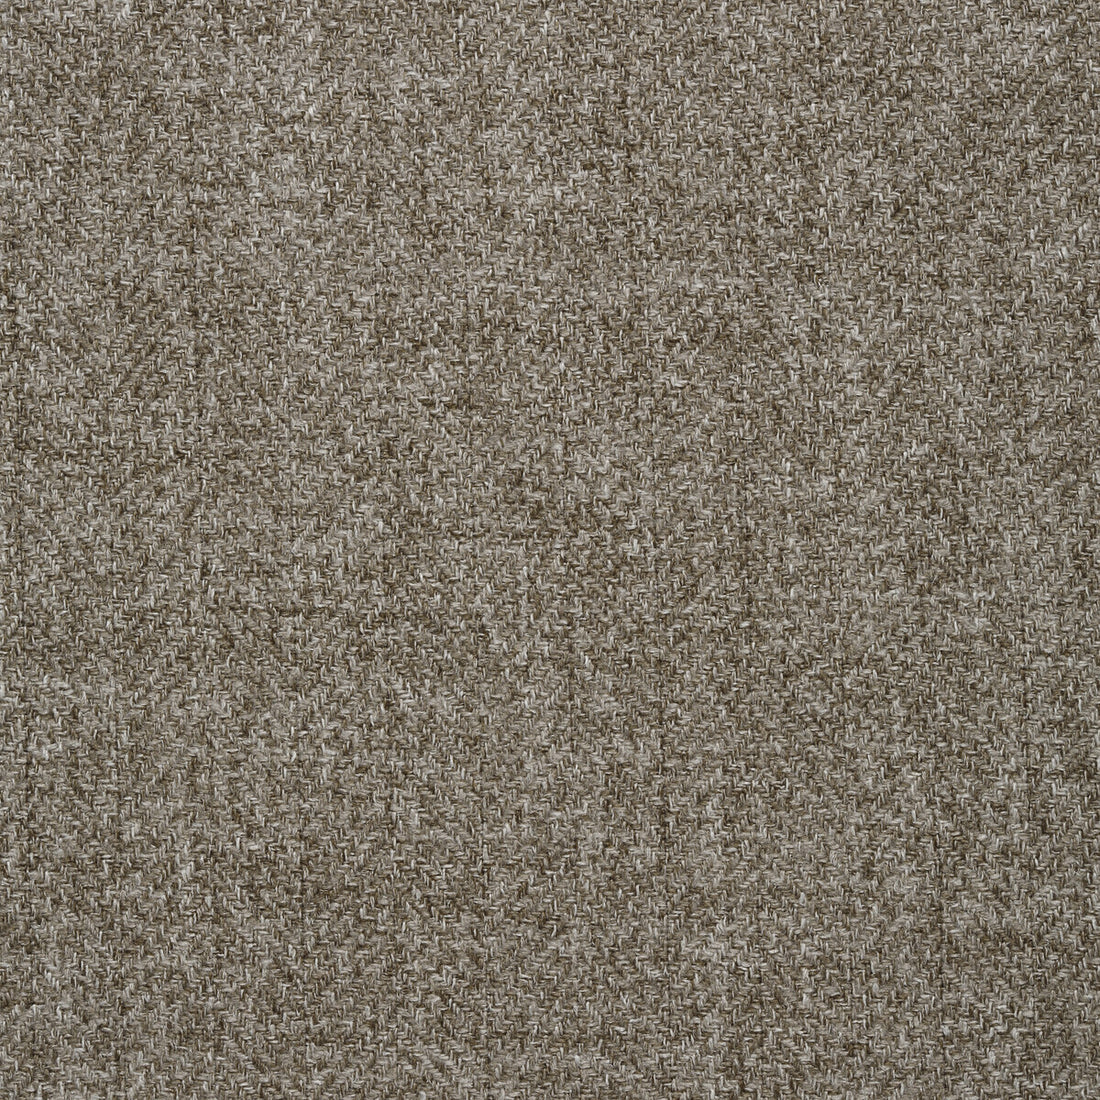 Kravet Smart fabric in 35119-106 color - pattern 35119.106.0 - by Kravet Smart in the Performance Crypton Home collection